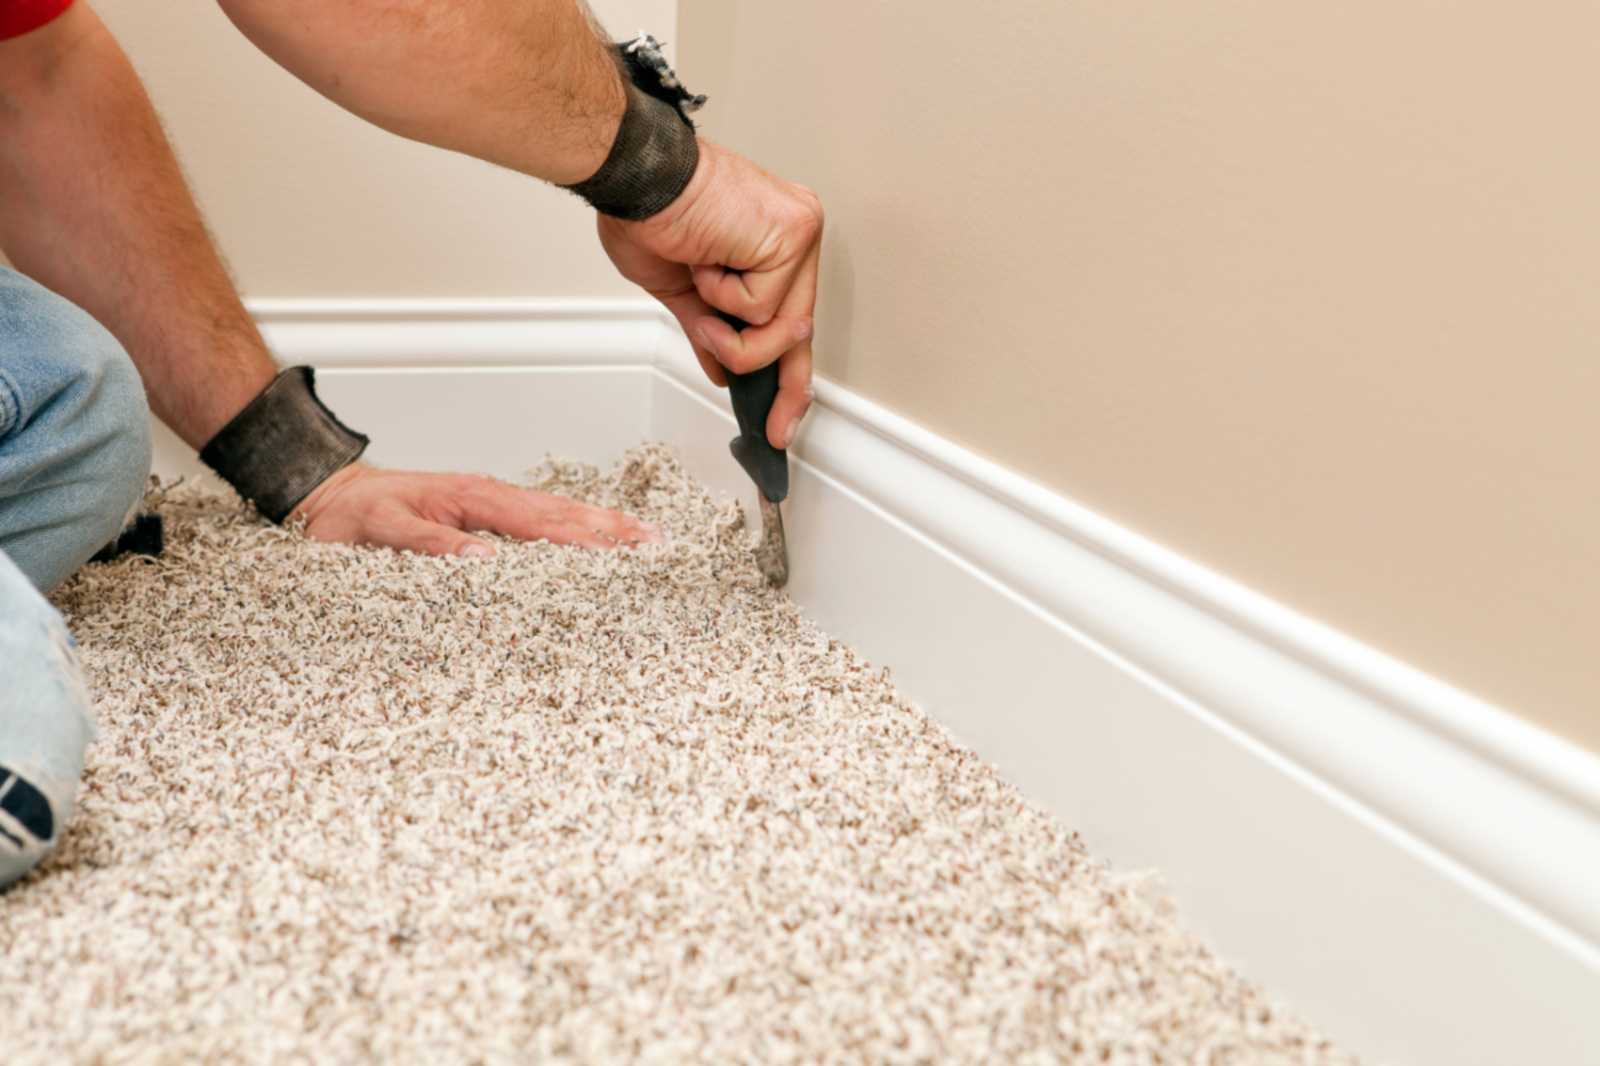 Featured image for “Preparing Your Home For Carpet Installation”